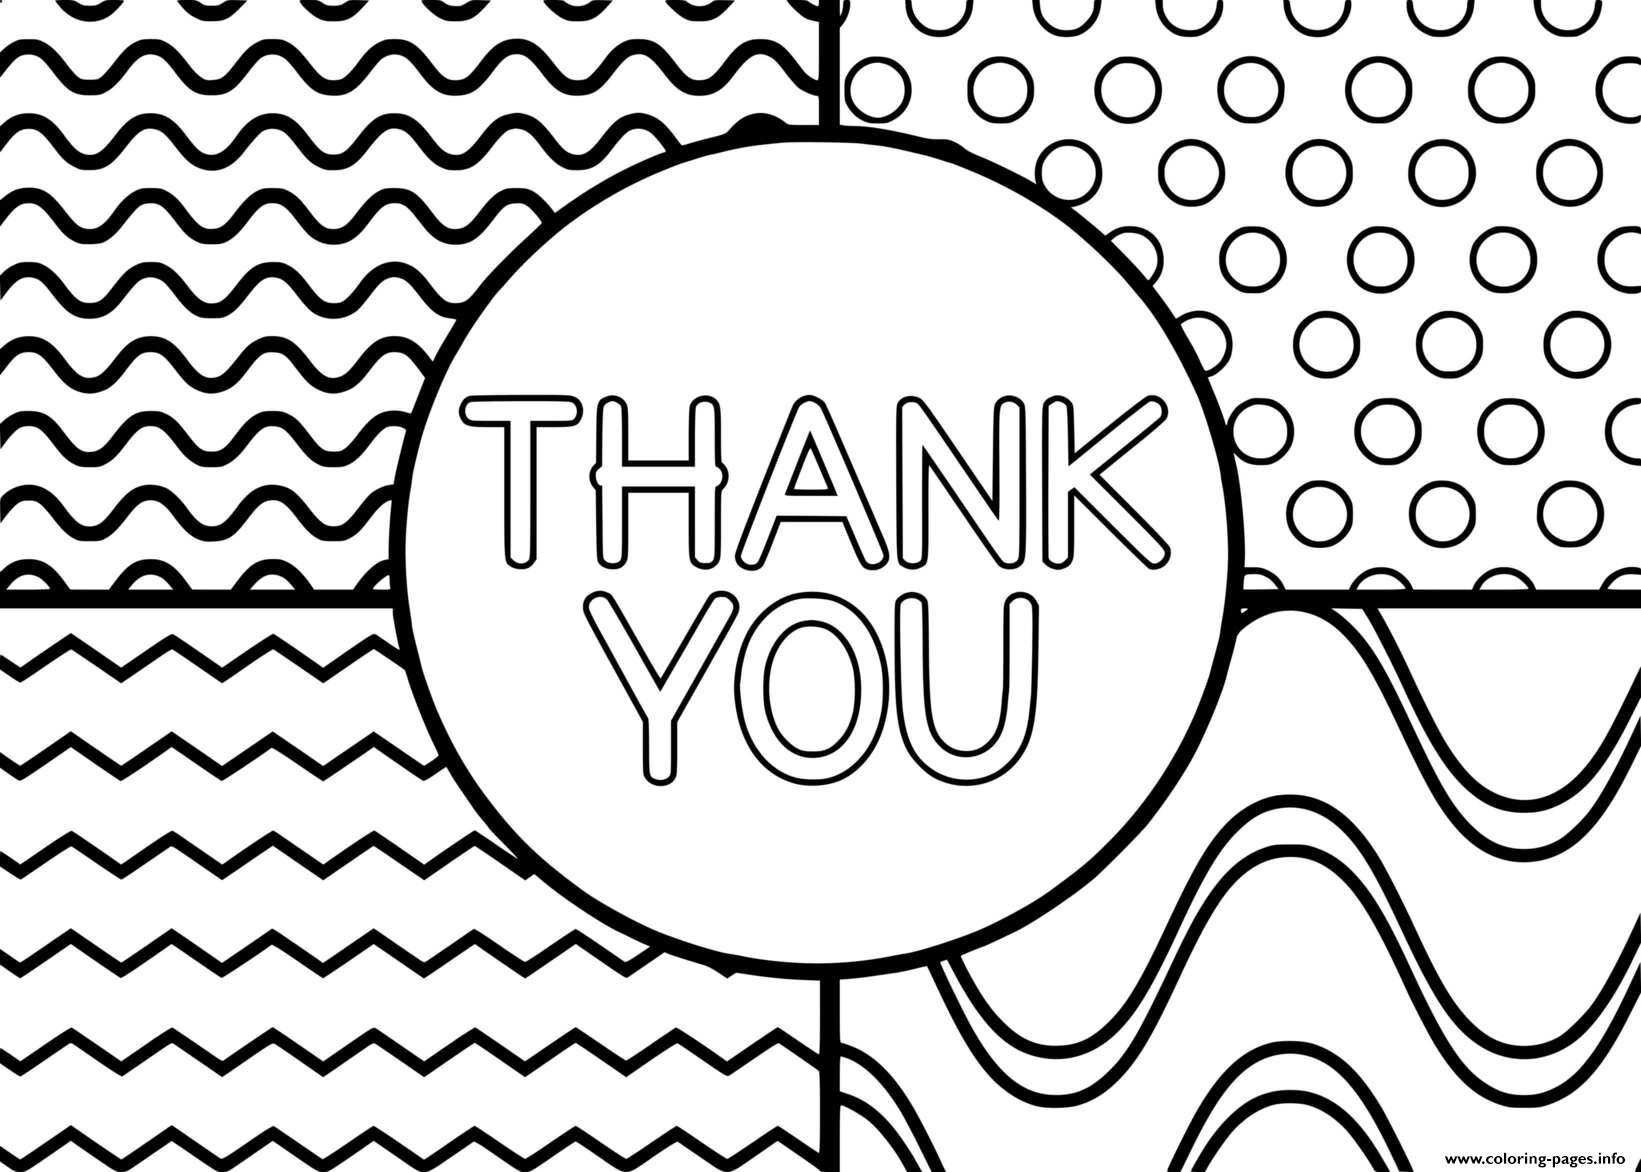 thank-you-card-coloring-page-printable